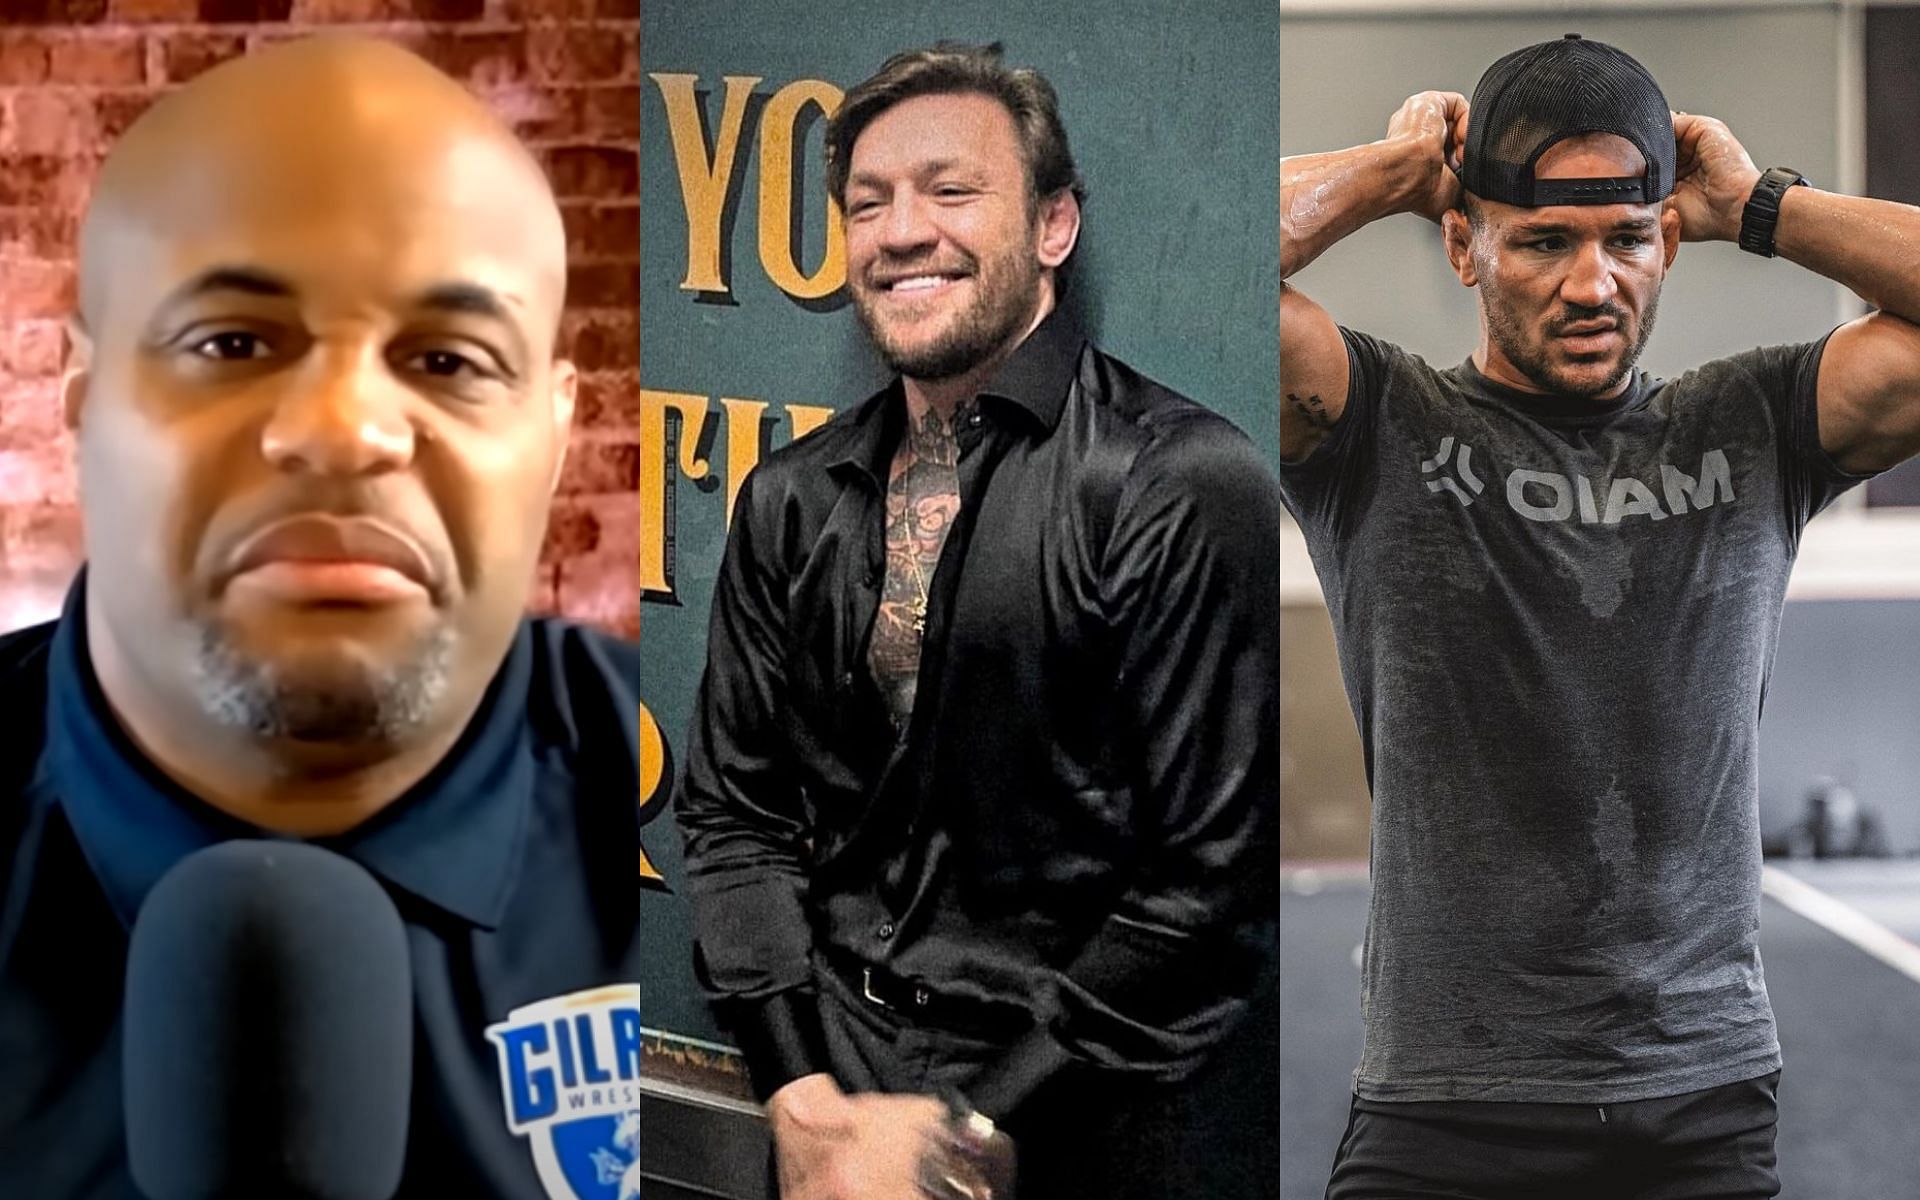 Daniel Cormier (left), Conor McGregor (middle), and Michael Chandler (right) [Images courtesy: Daniel Cormier on YouTube, @thenotoriousmma on Instagram, and @mikechandlermma on Instagram]